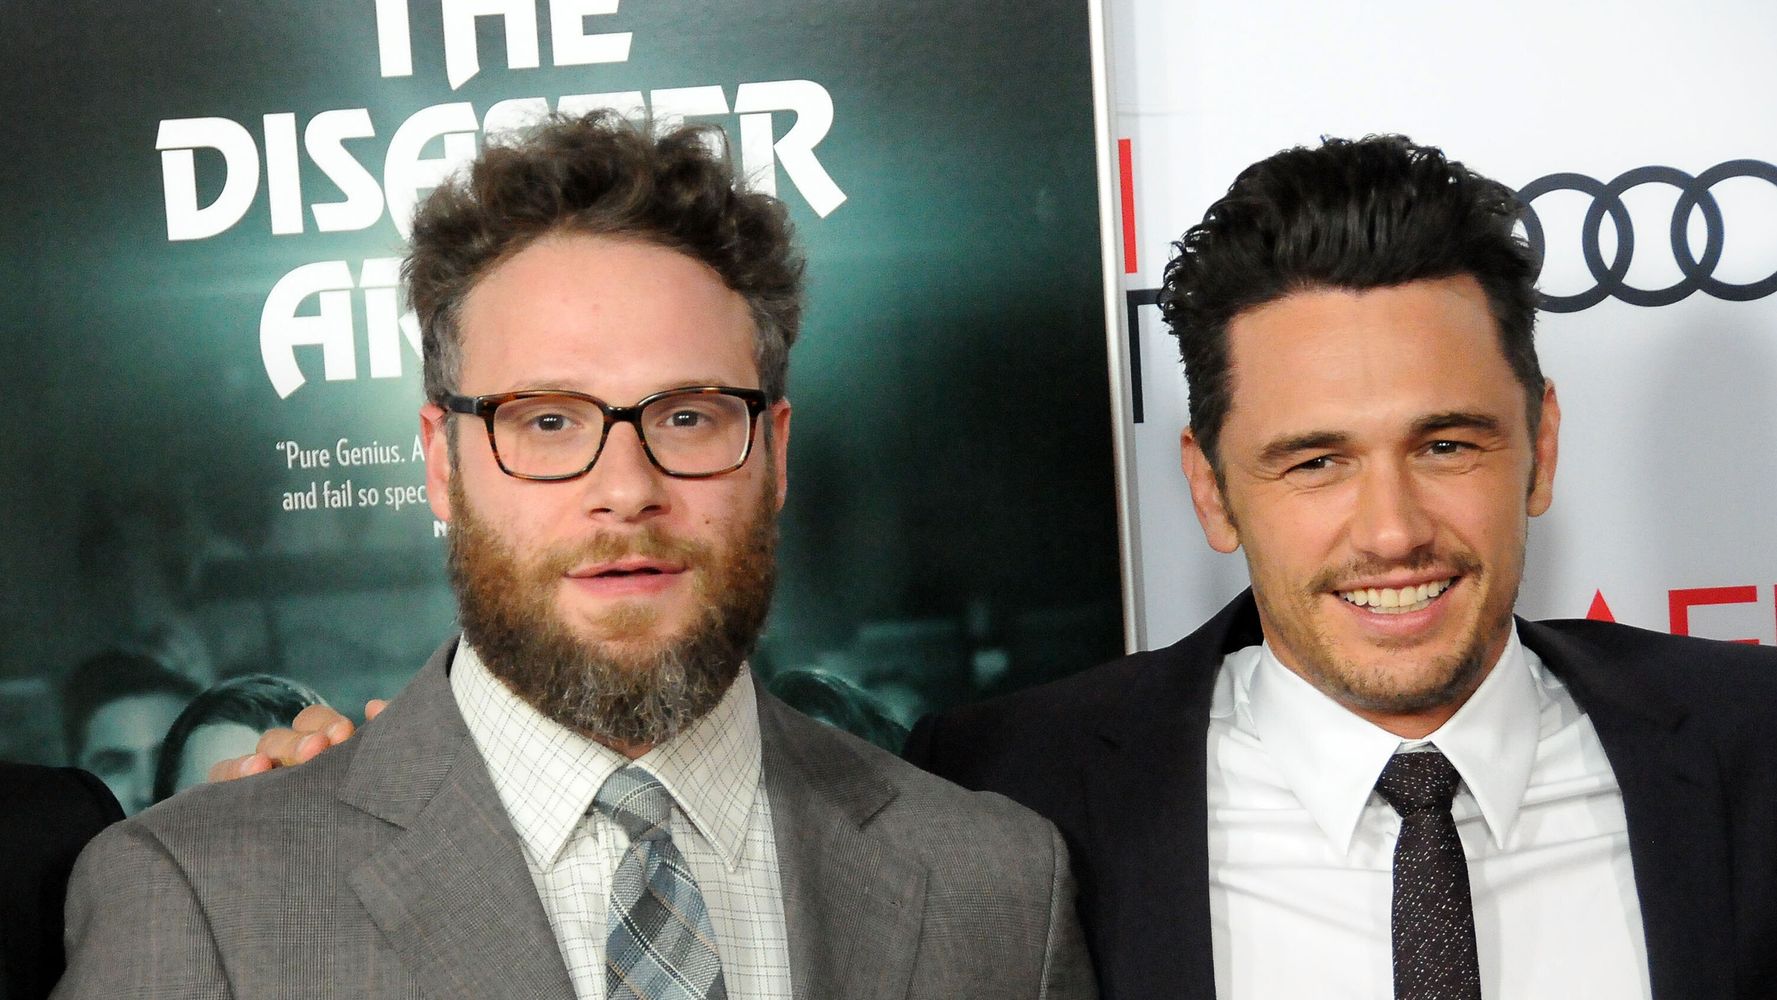 Seth Rogen Says He Has No Plans To Work With James Franco After Misconduct Claims